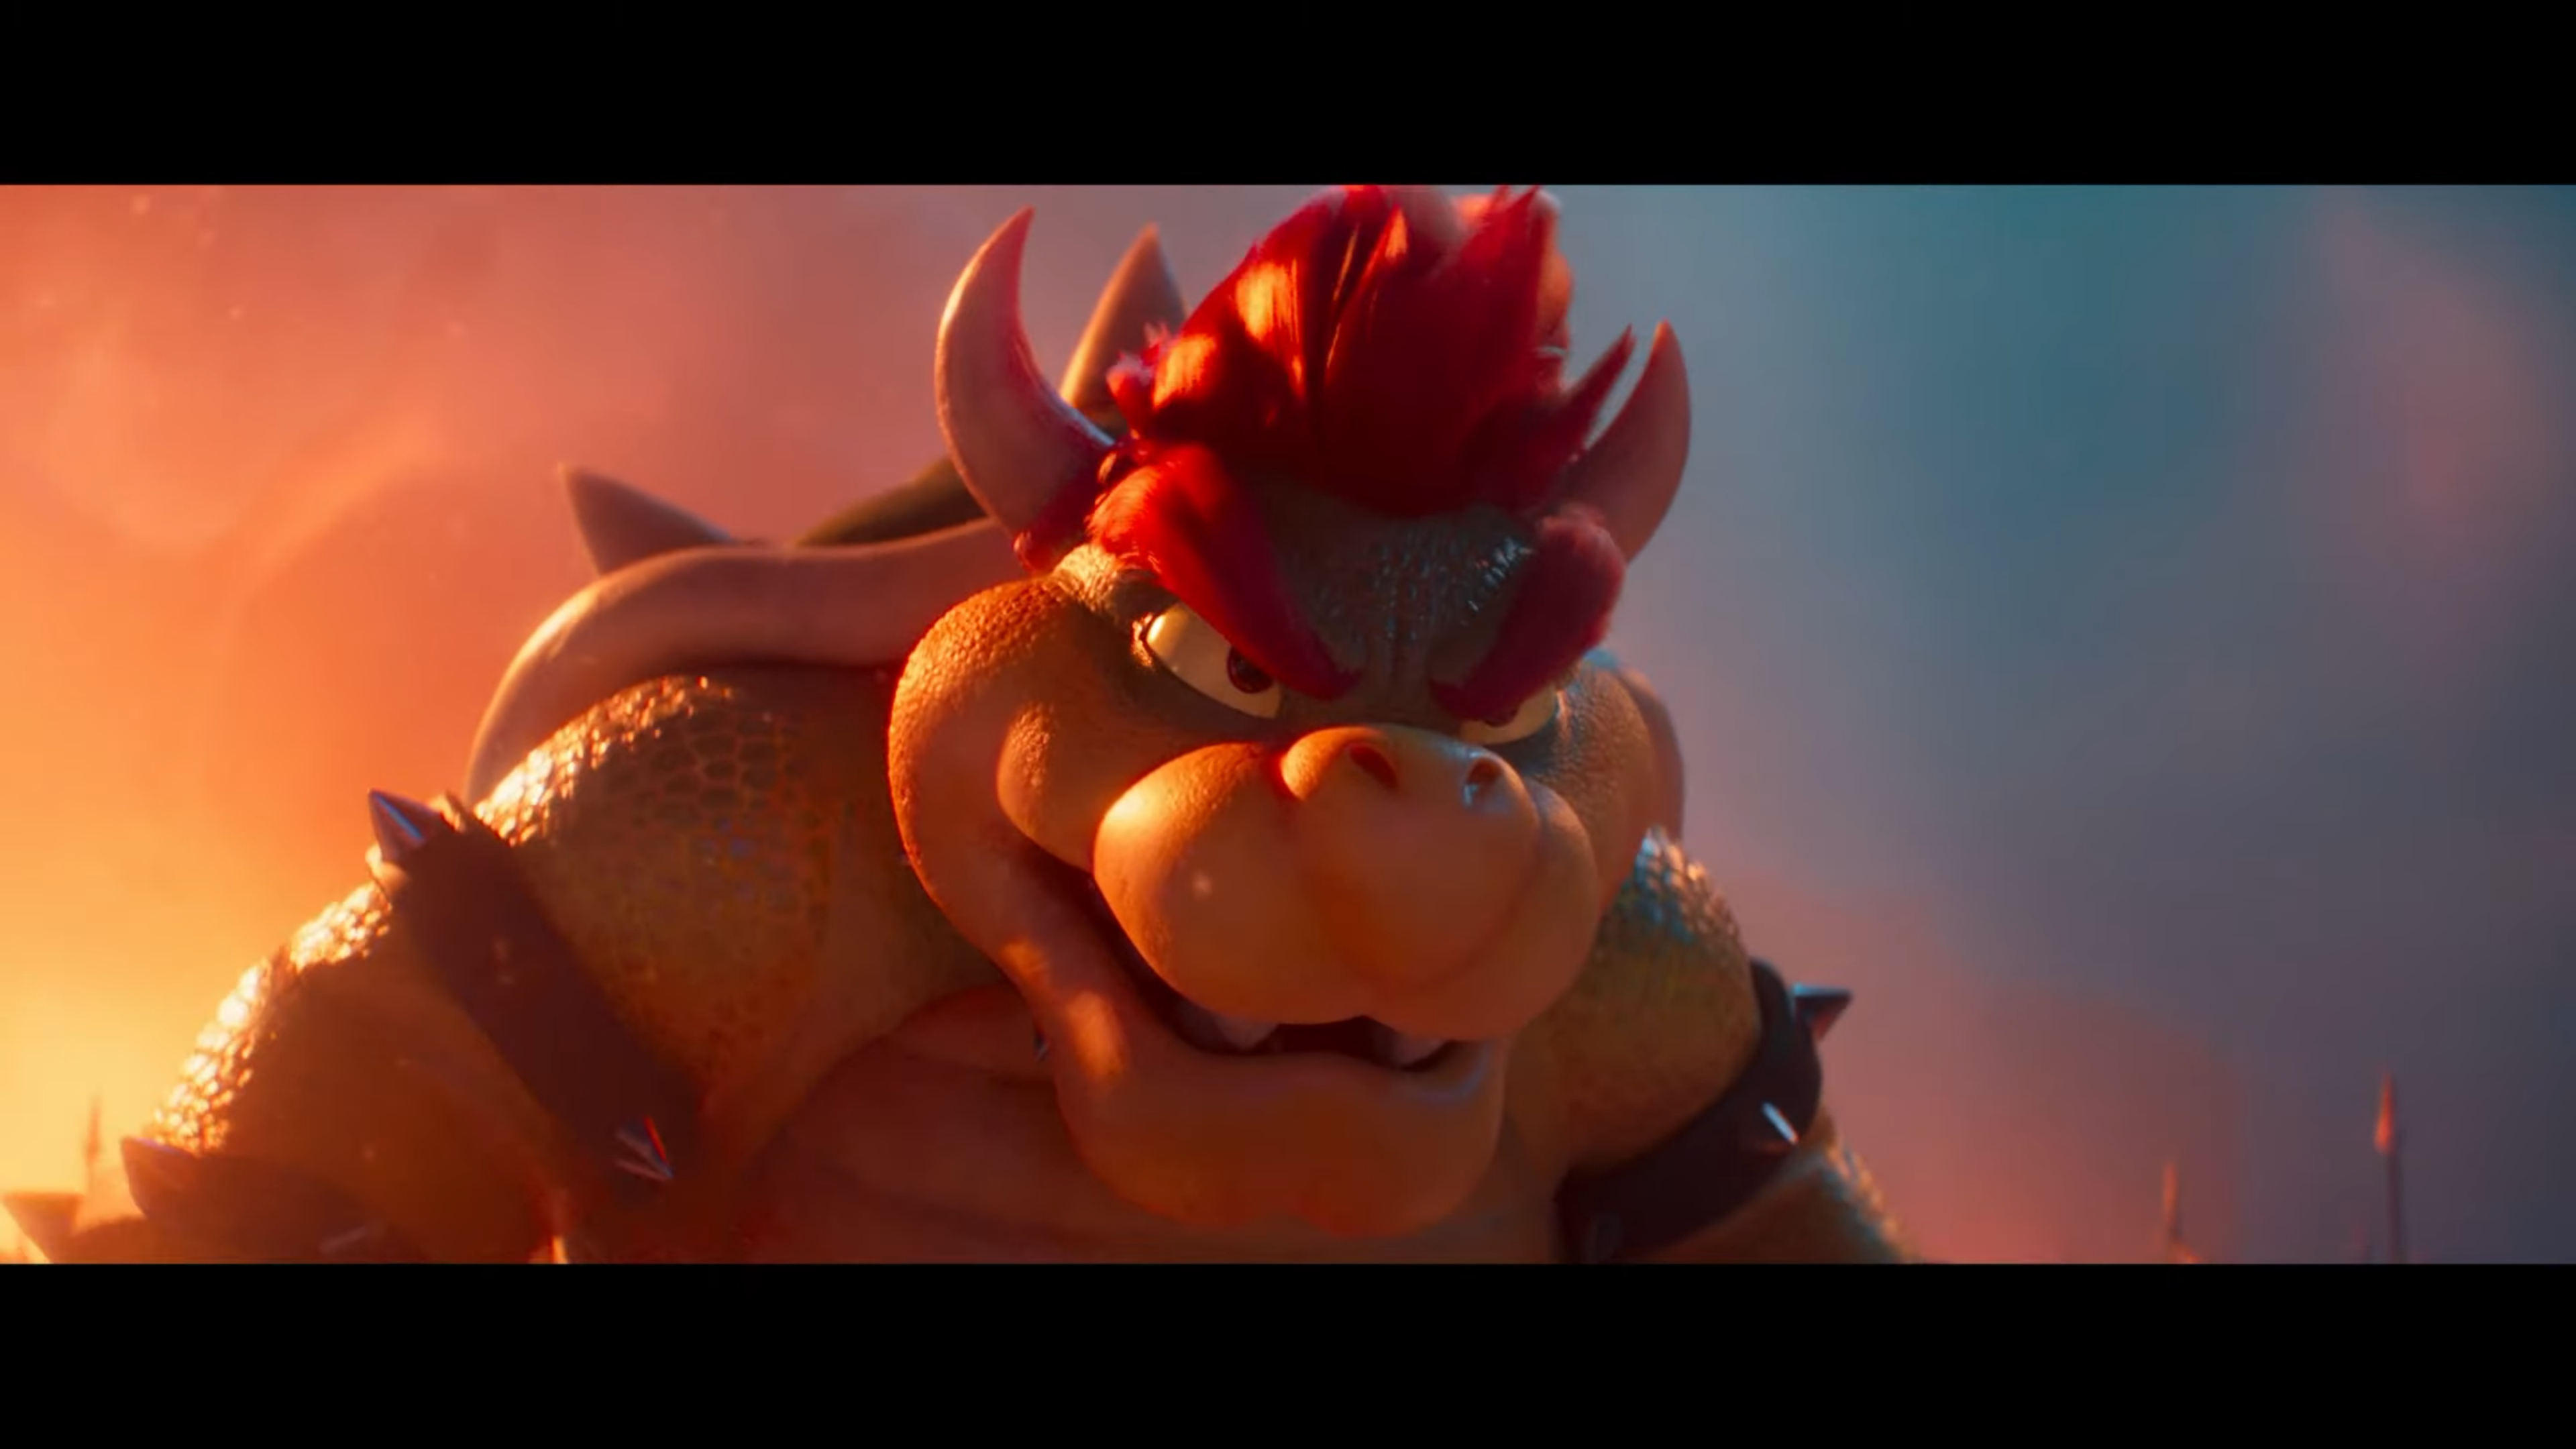 Here's a design comparison of Bowser from the Games to Bowser from the  Illumination movie. Did you like it? : r/Mario